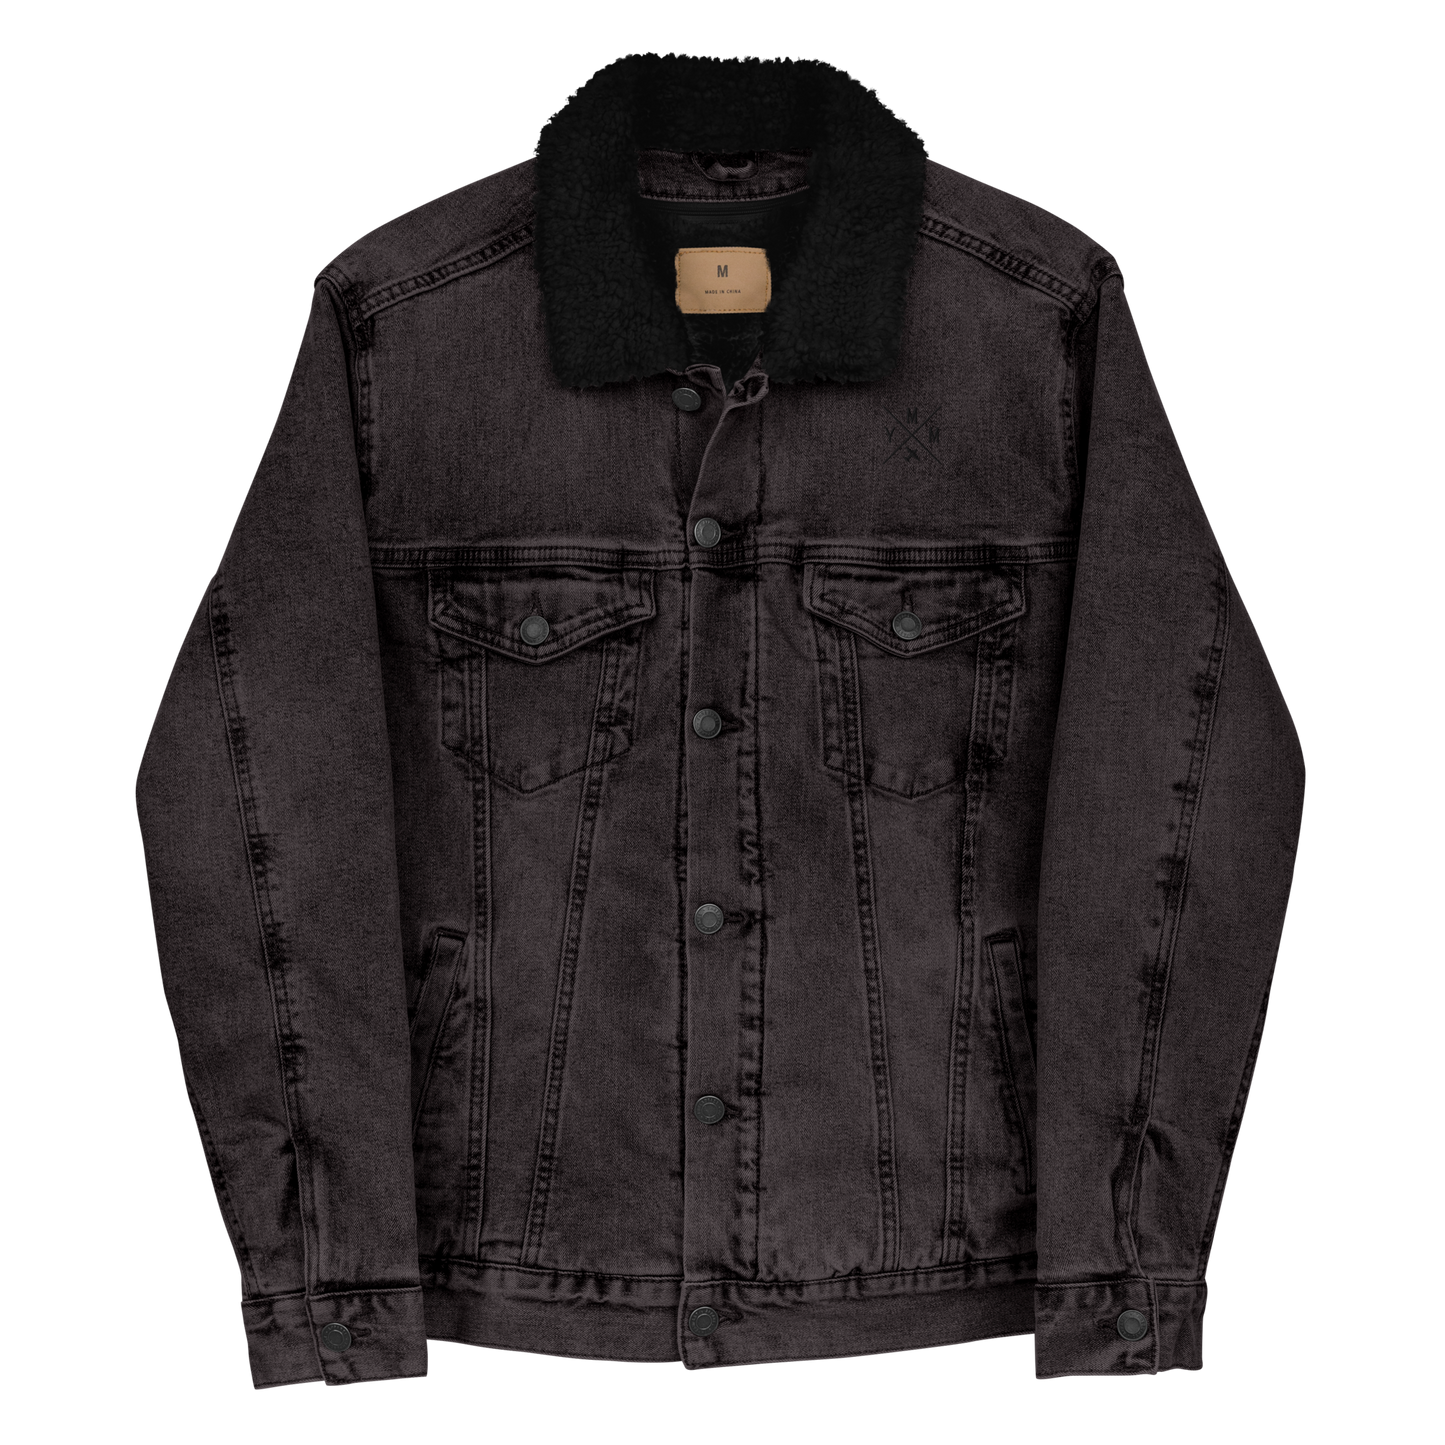 YHM Designs - YMM Fort McMurray Denim Sherpa Jacket - Crossed-X Design with Airport Code and Vintage Propliner - Black & White Embroidery - Image 06